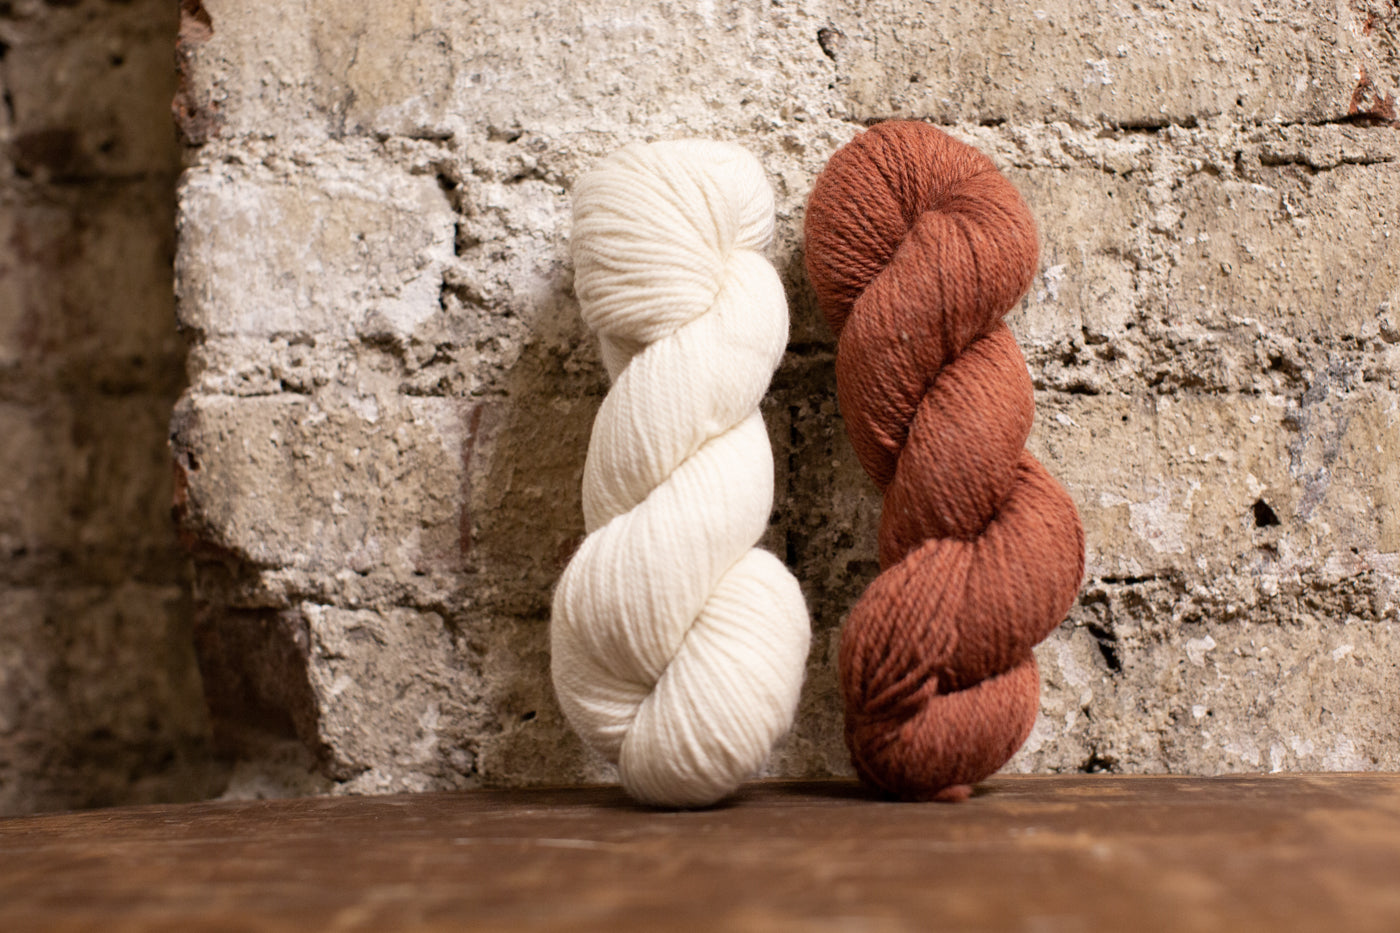 White yarn and muted red yarn leaning against a white wash brick wall.